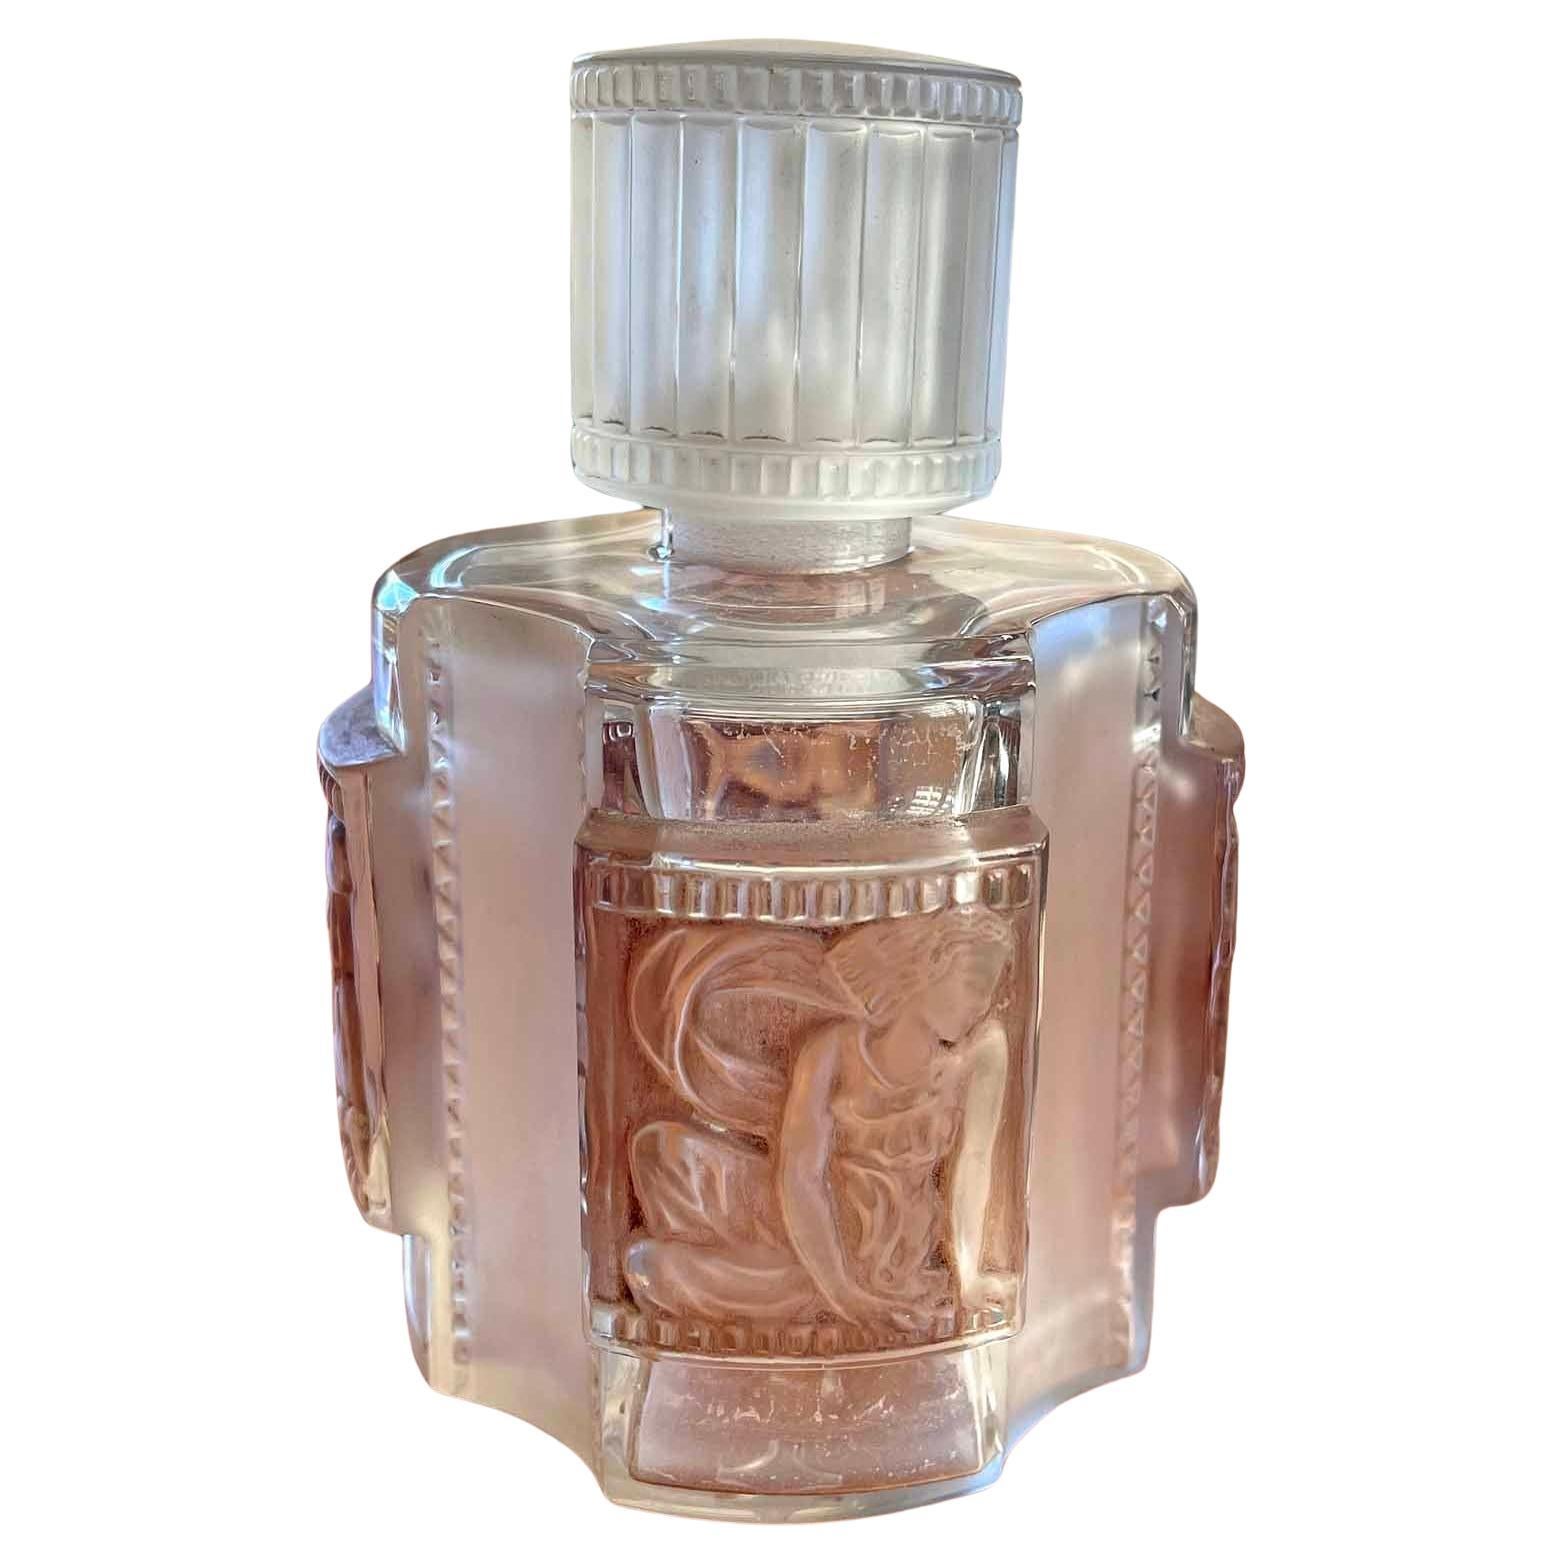 Although René Lalique -- France's greatest designer in glass in the 1920s, 30s and 40s -- made many bottles for the leading perfumiers of the day, the Helene bottle from 1942 is one of his loveliest.  The cylindrical body is decorated with four